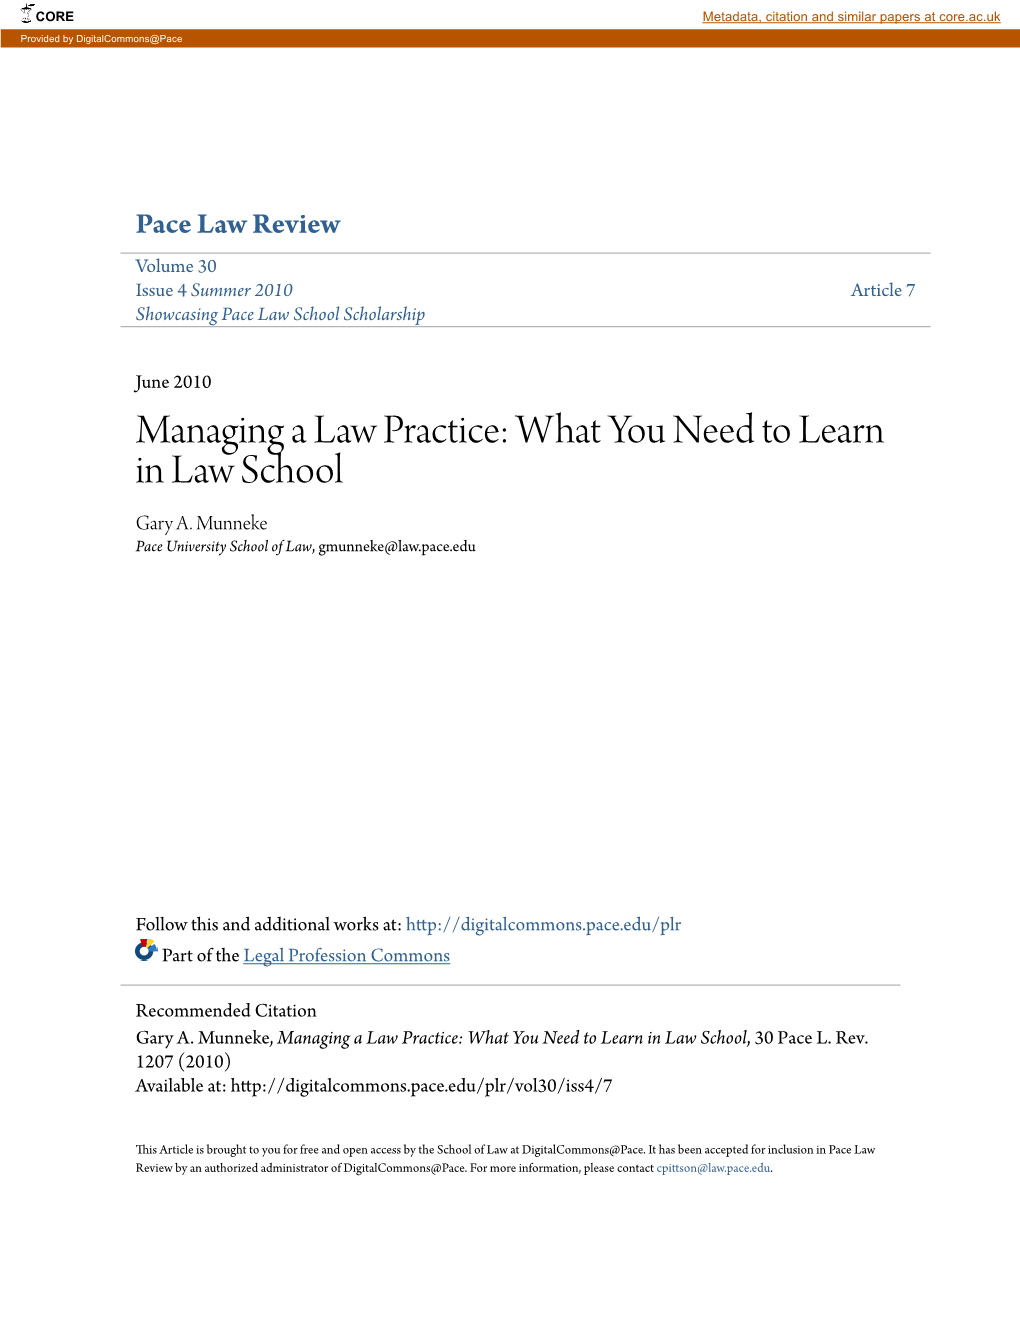 Managing a Law Practice: What You Need to Learn in Law School Gary A